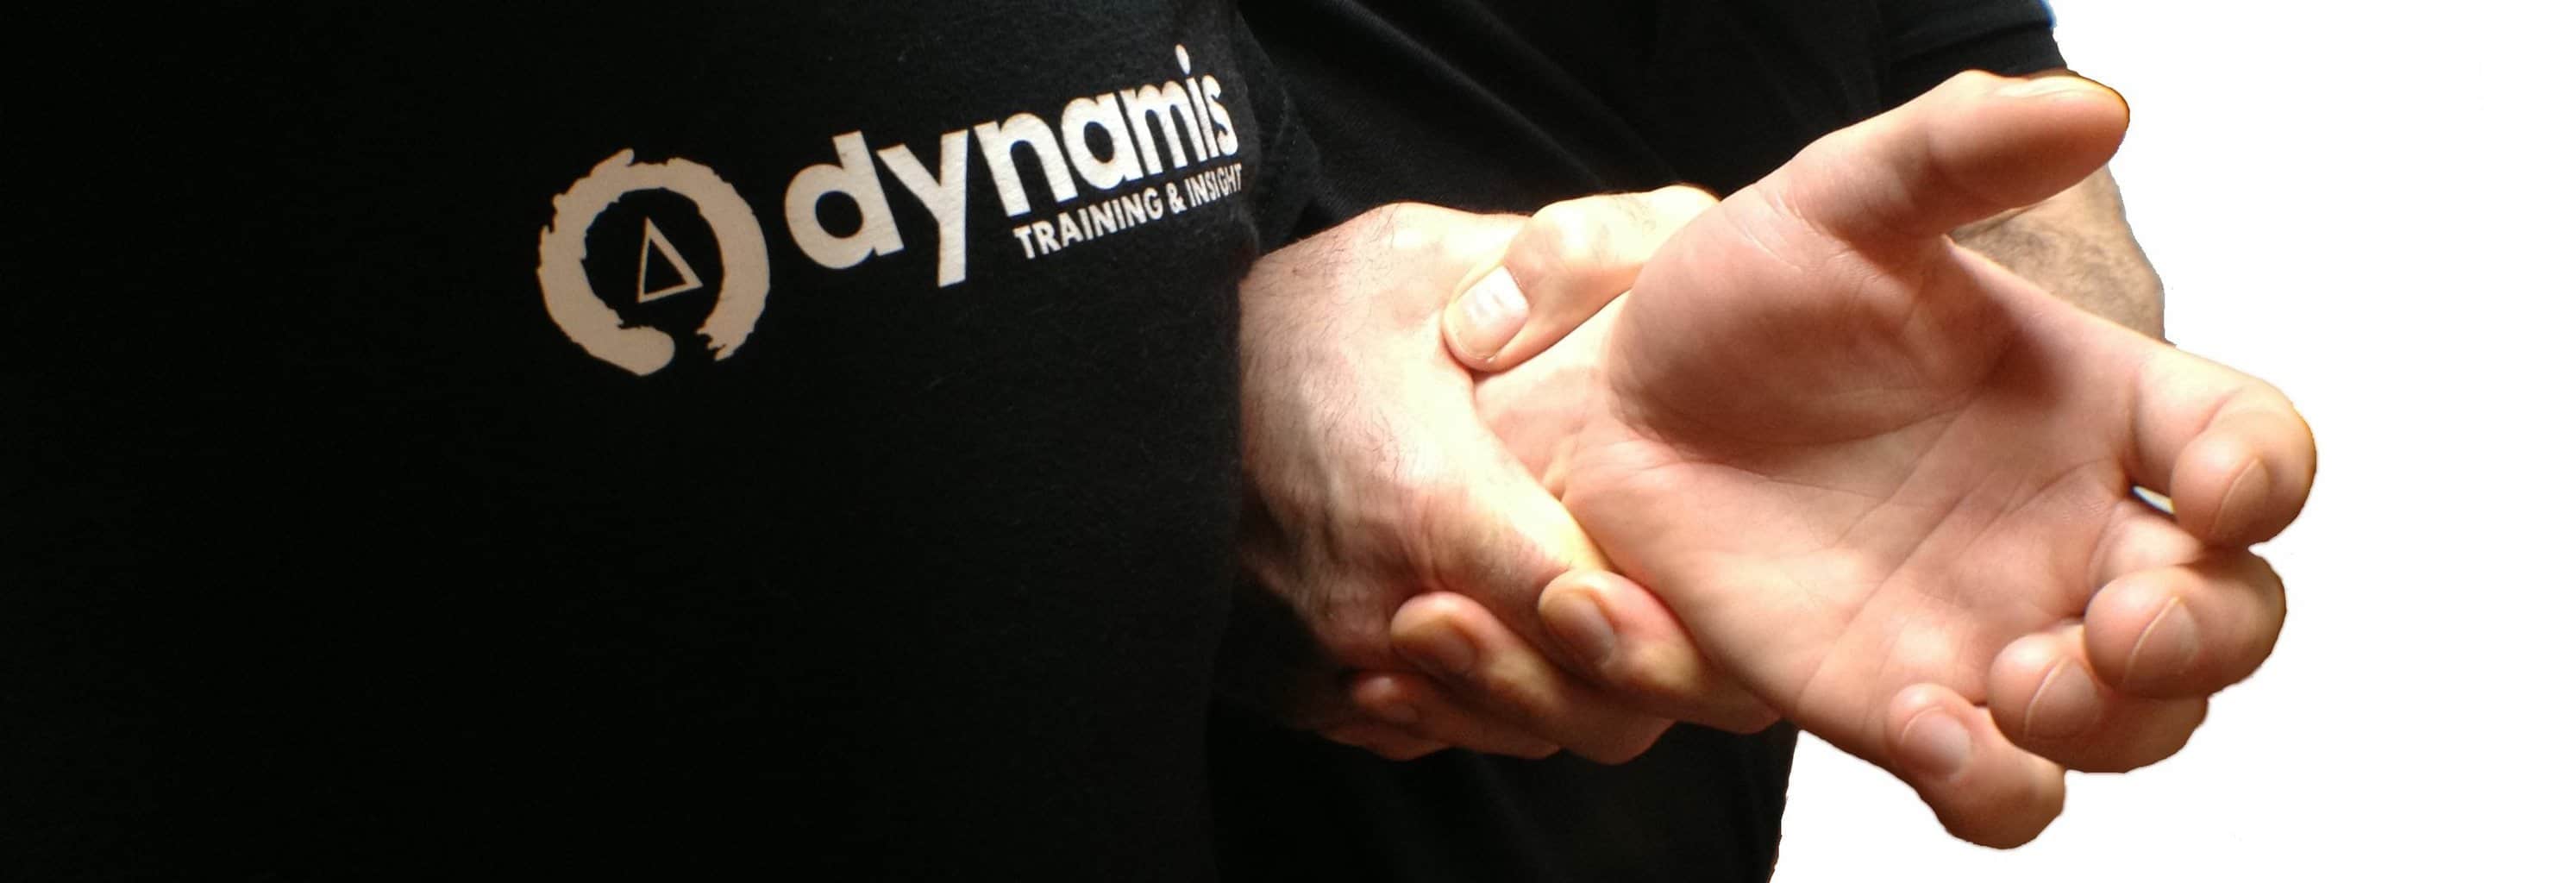 Positive Handling Training from Dynamis